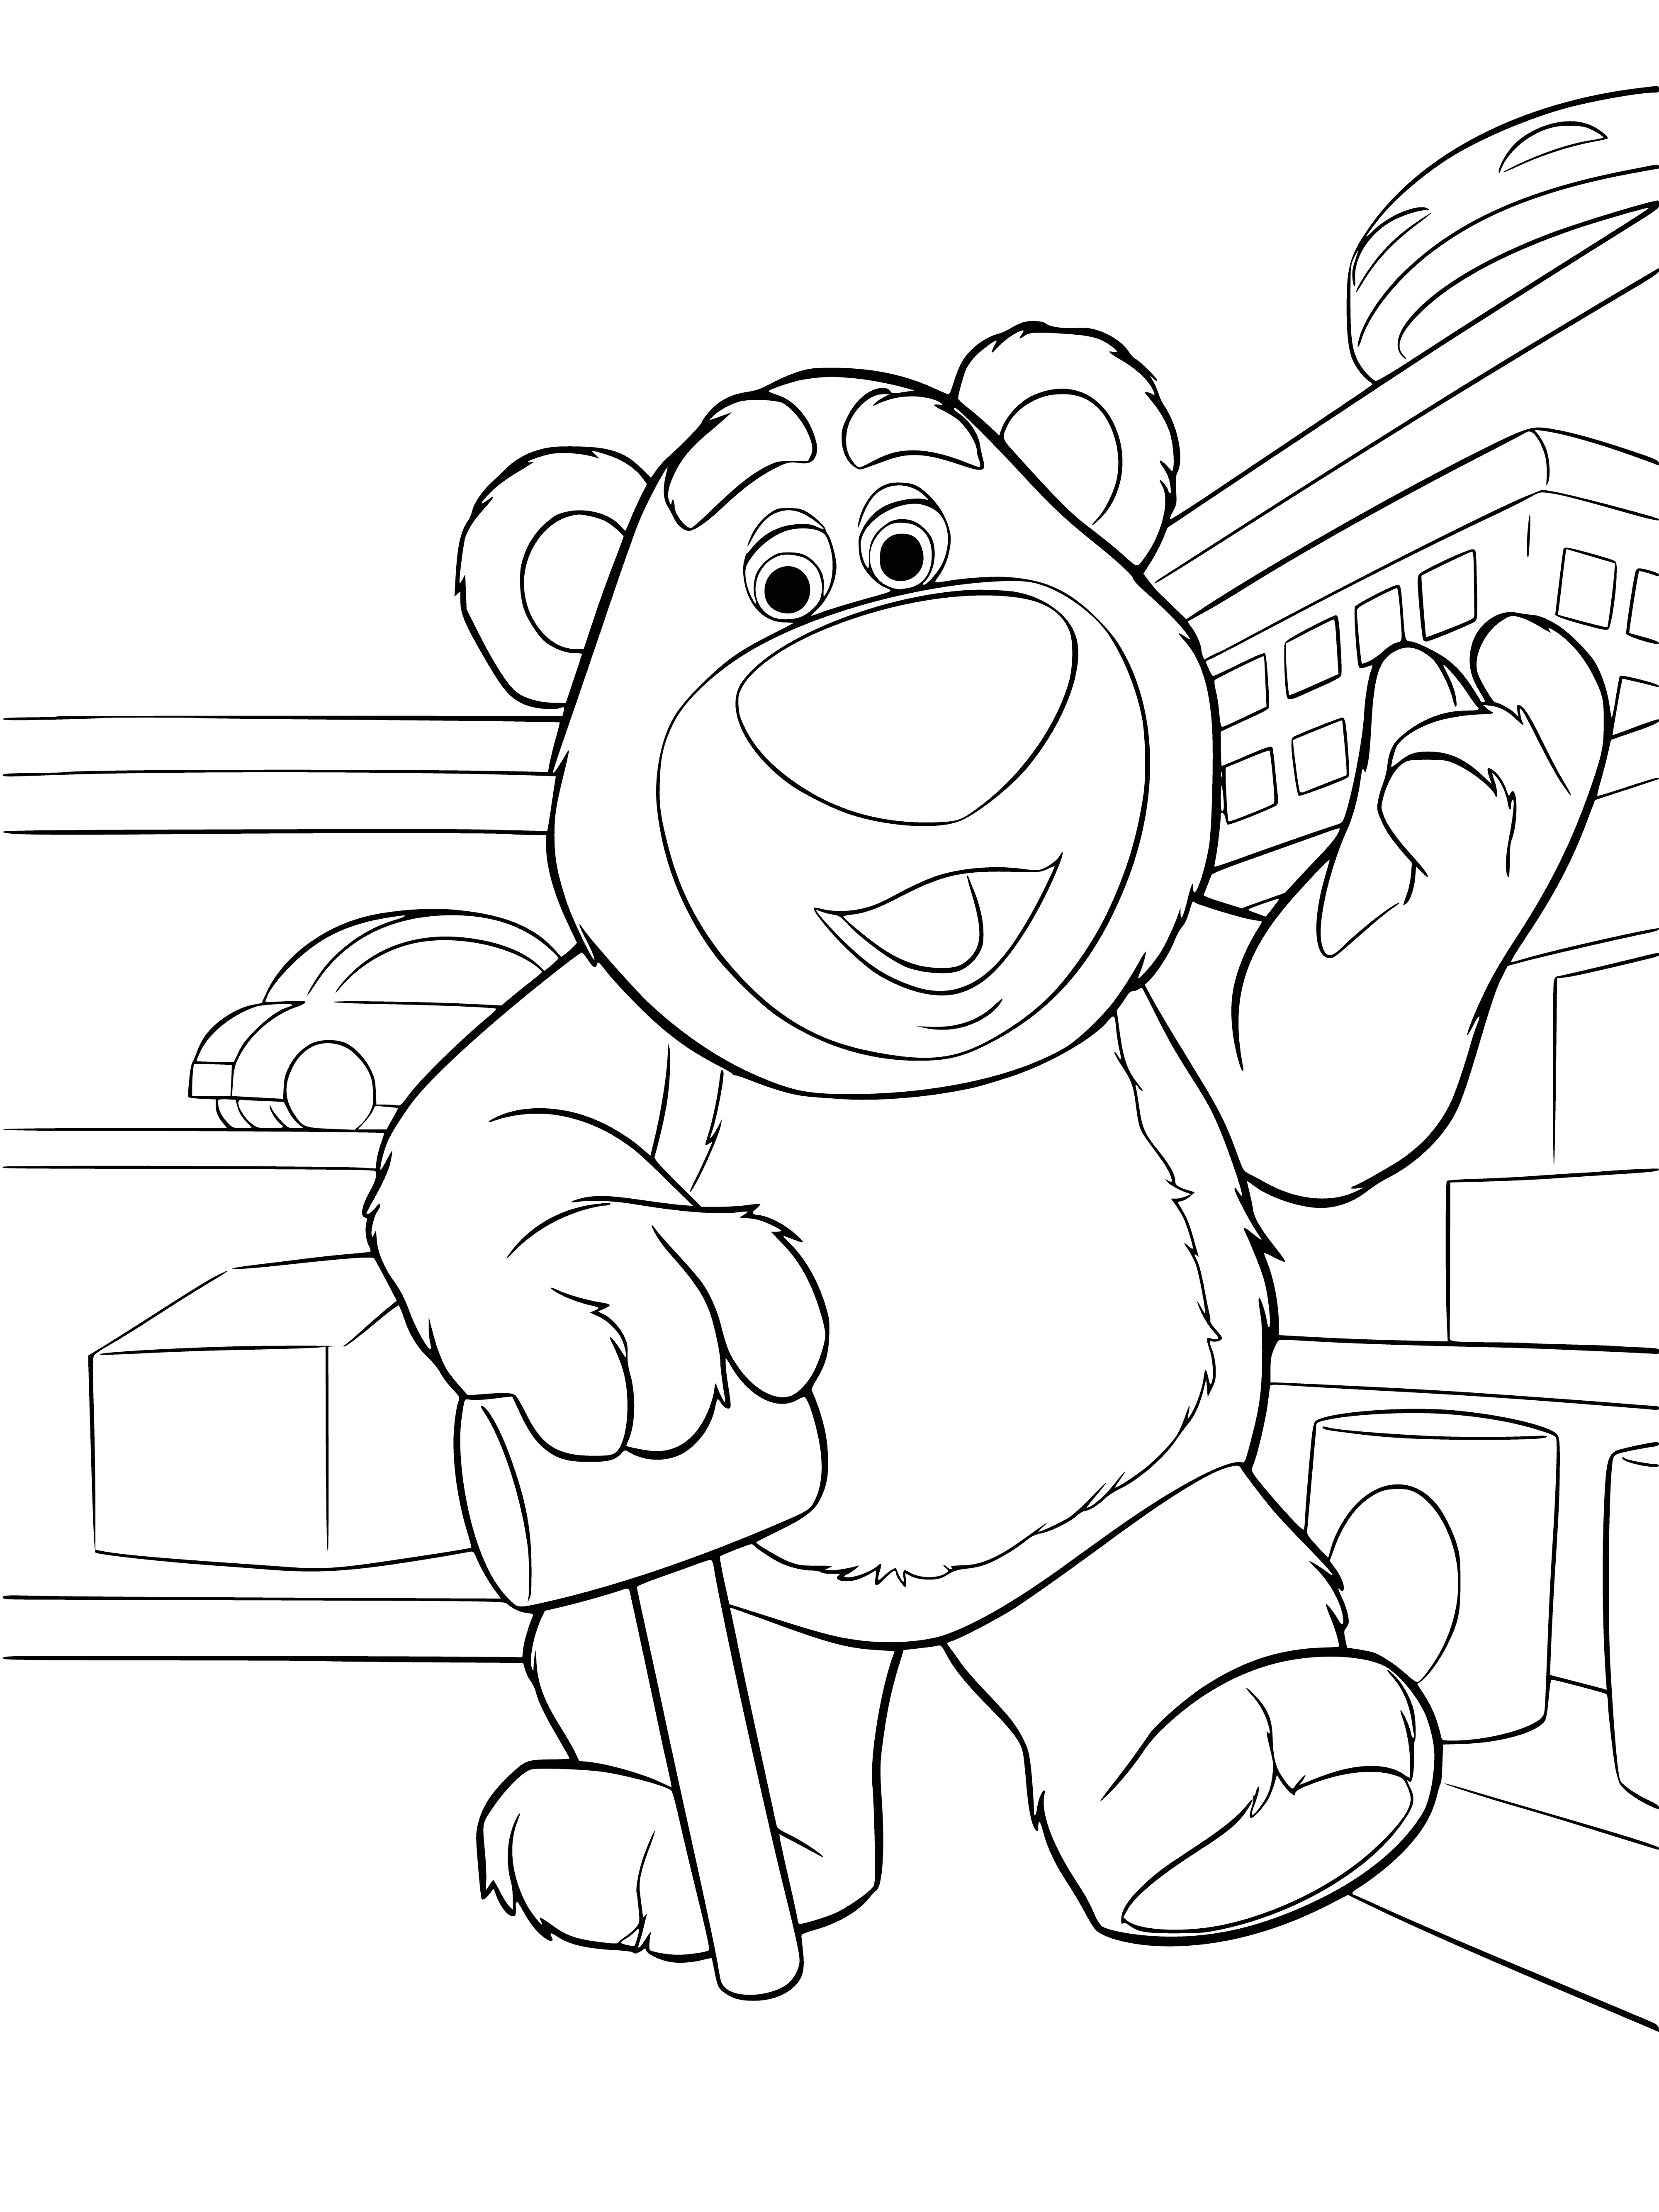 coloring page: A big pink teddy bear with a huge grin and outstretched arms, squatted and covered in matted fur.